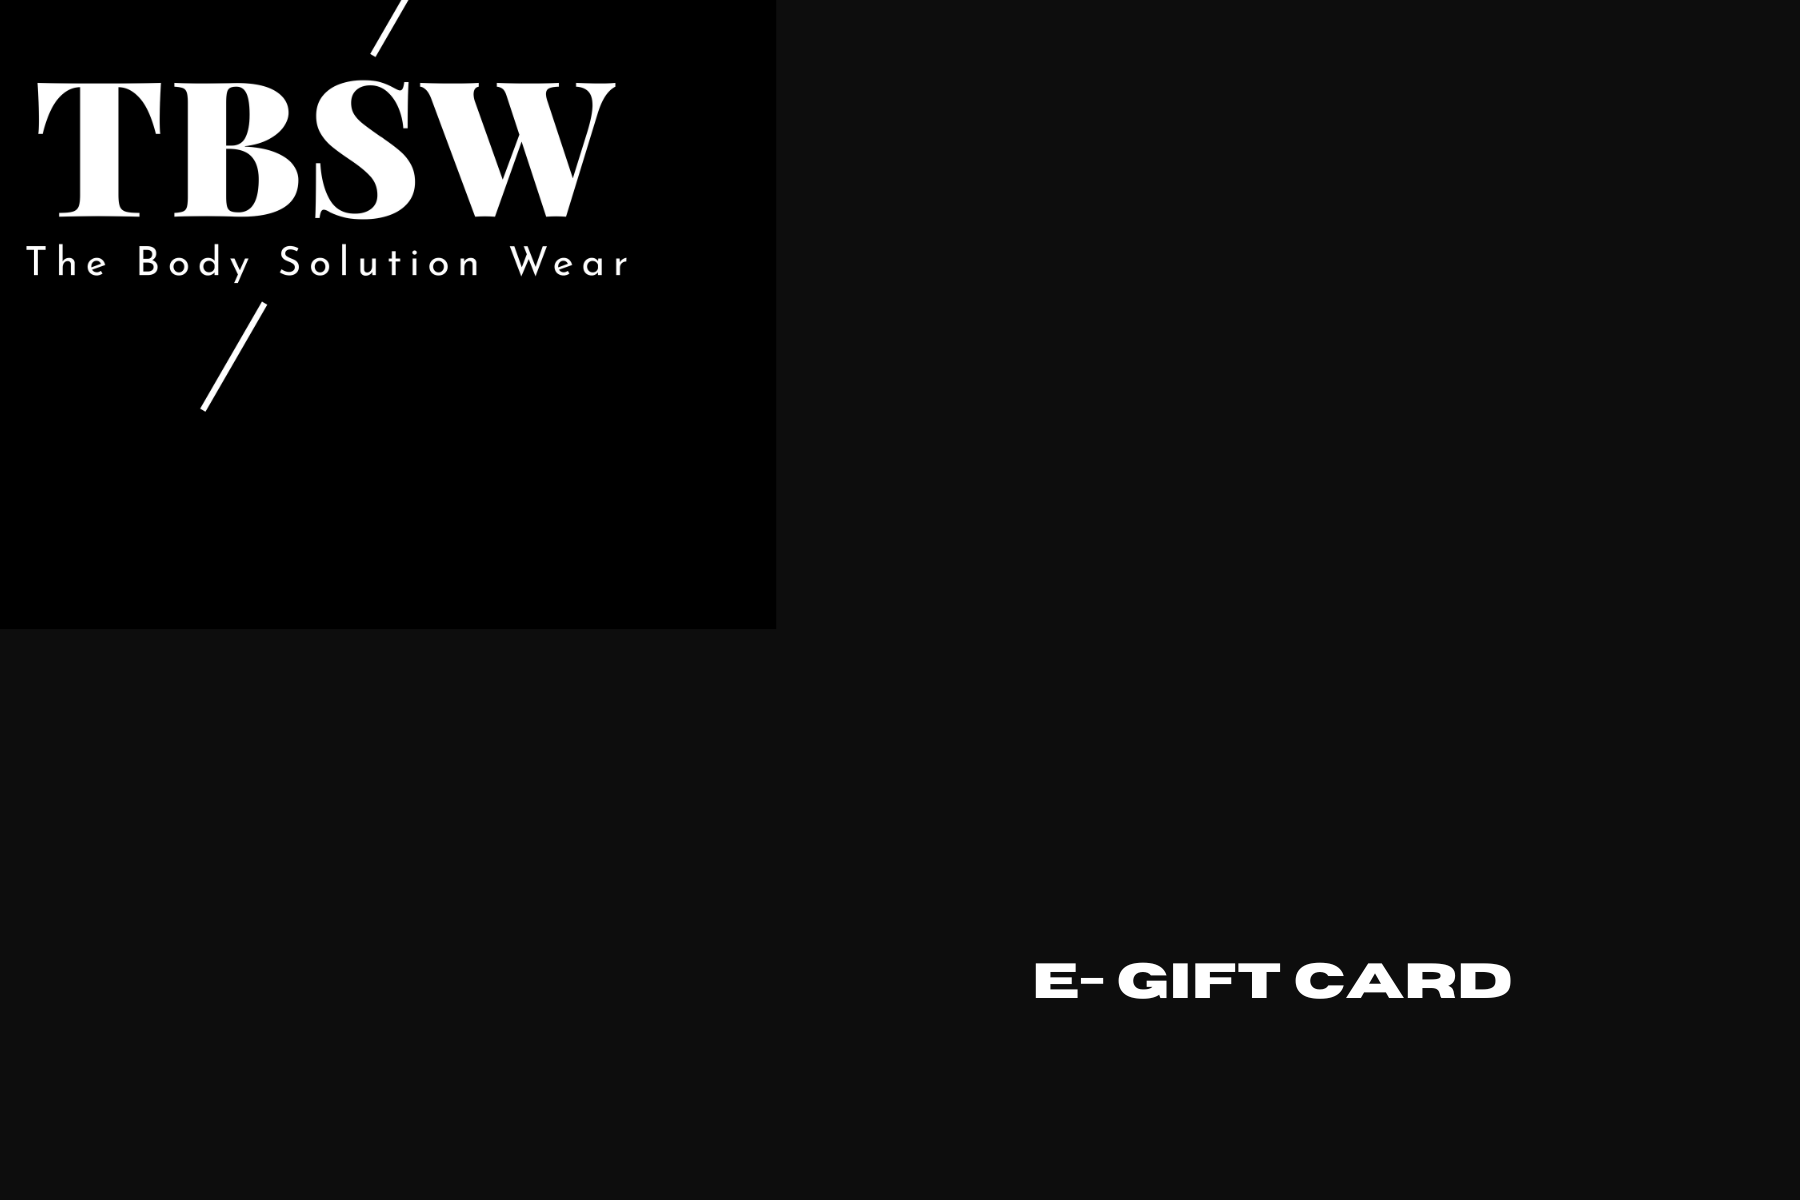 £200 GIFT CARD - TBSW